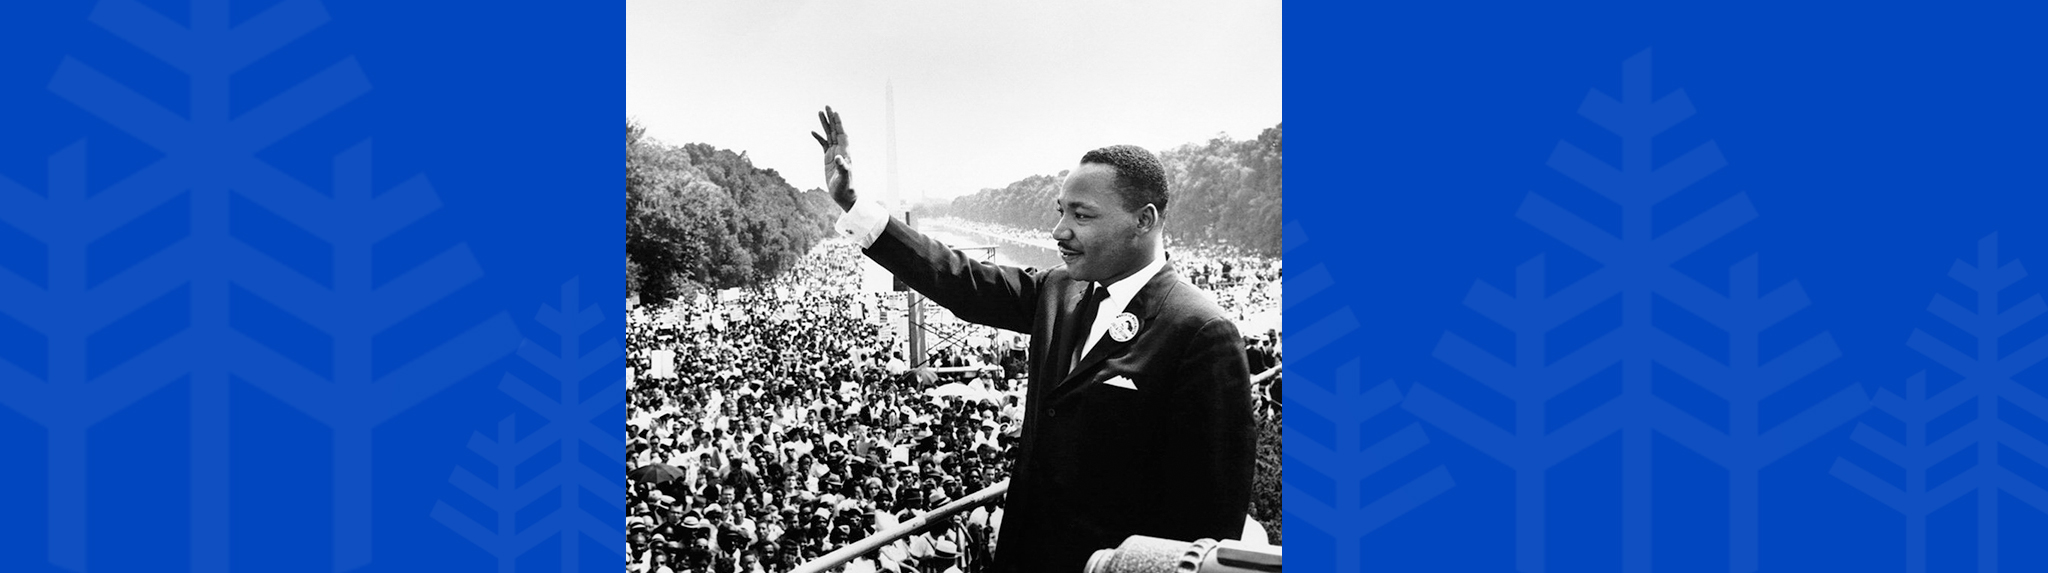 Martin Luther King Jr Day events banner